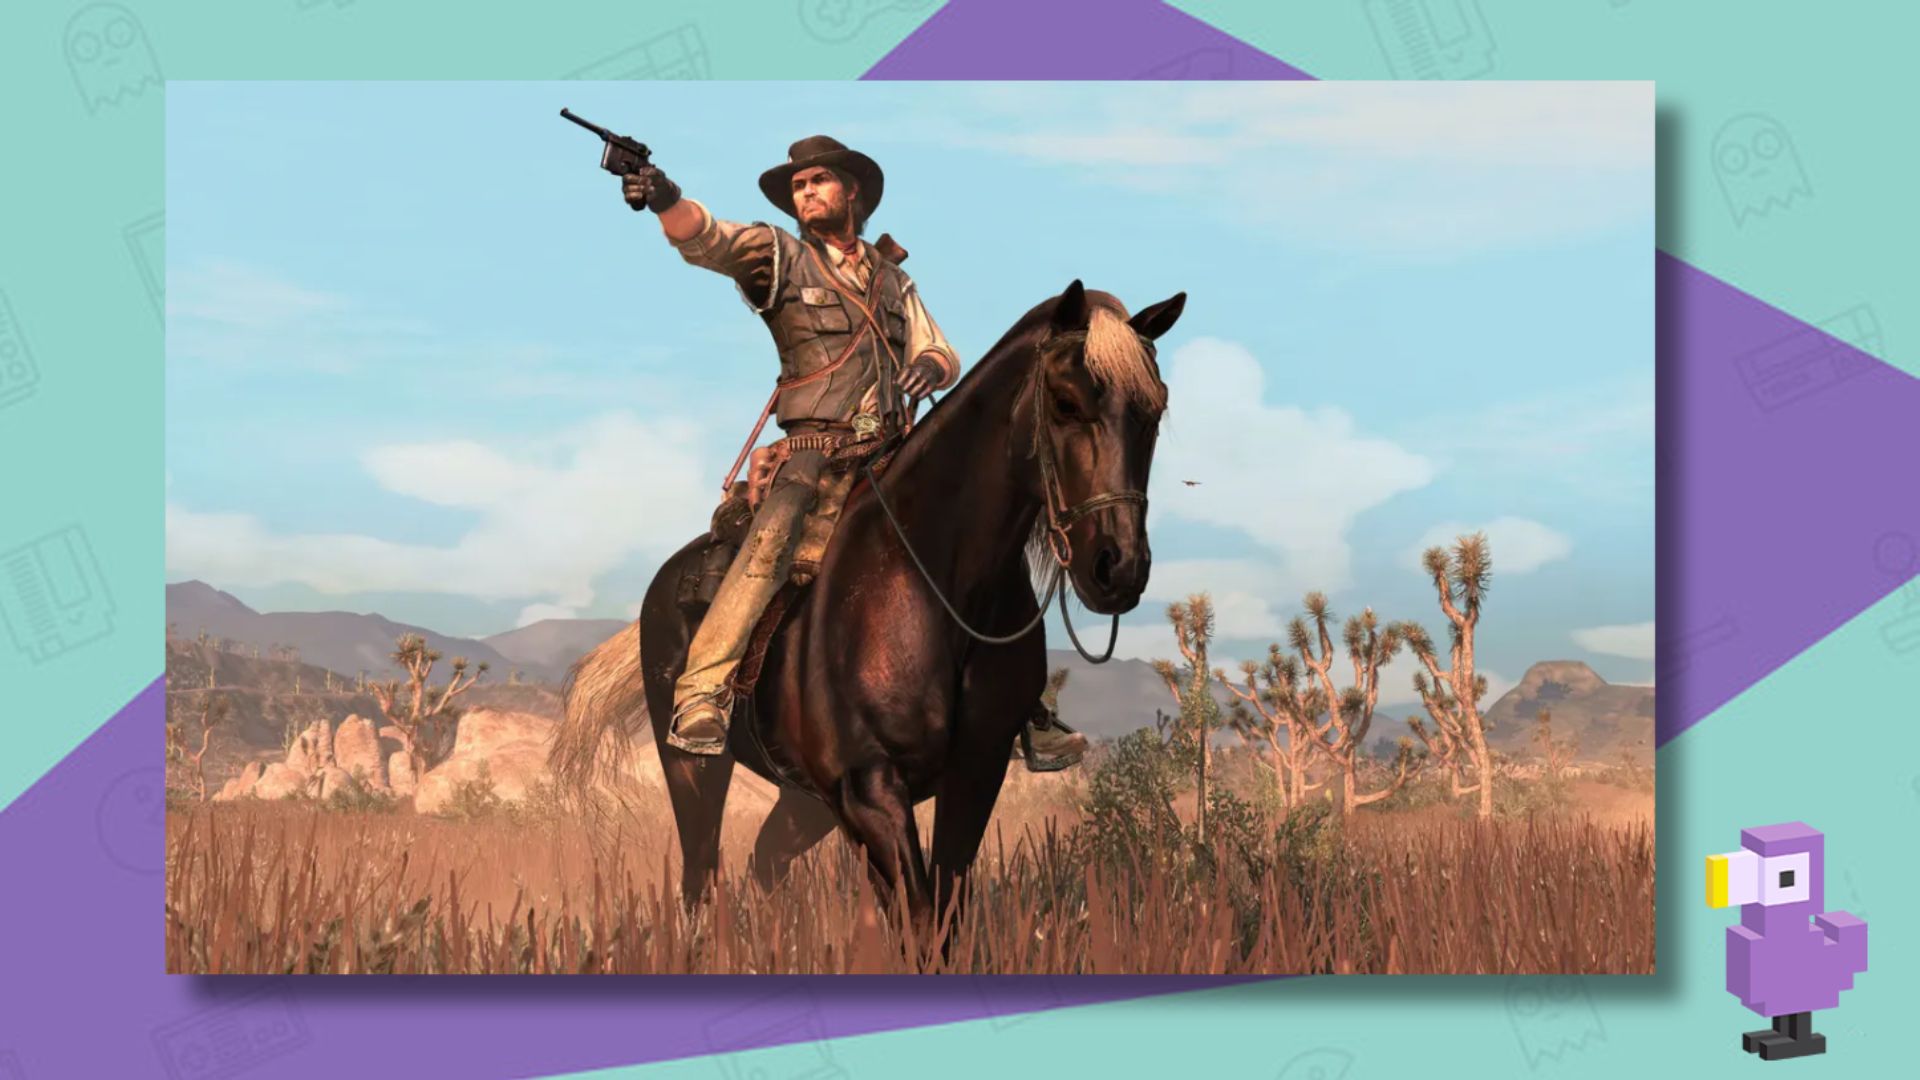 Red Dead Redemption Received 60 FPS on PS5 Thanks to the New Patch 1.3